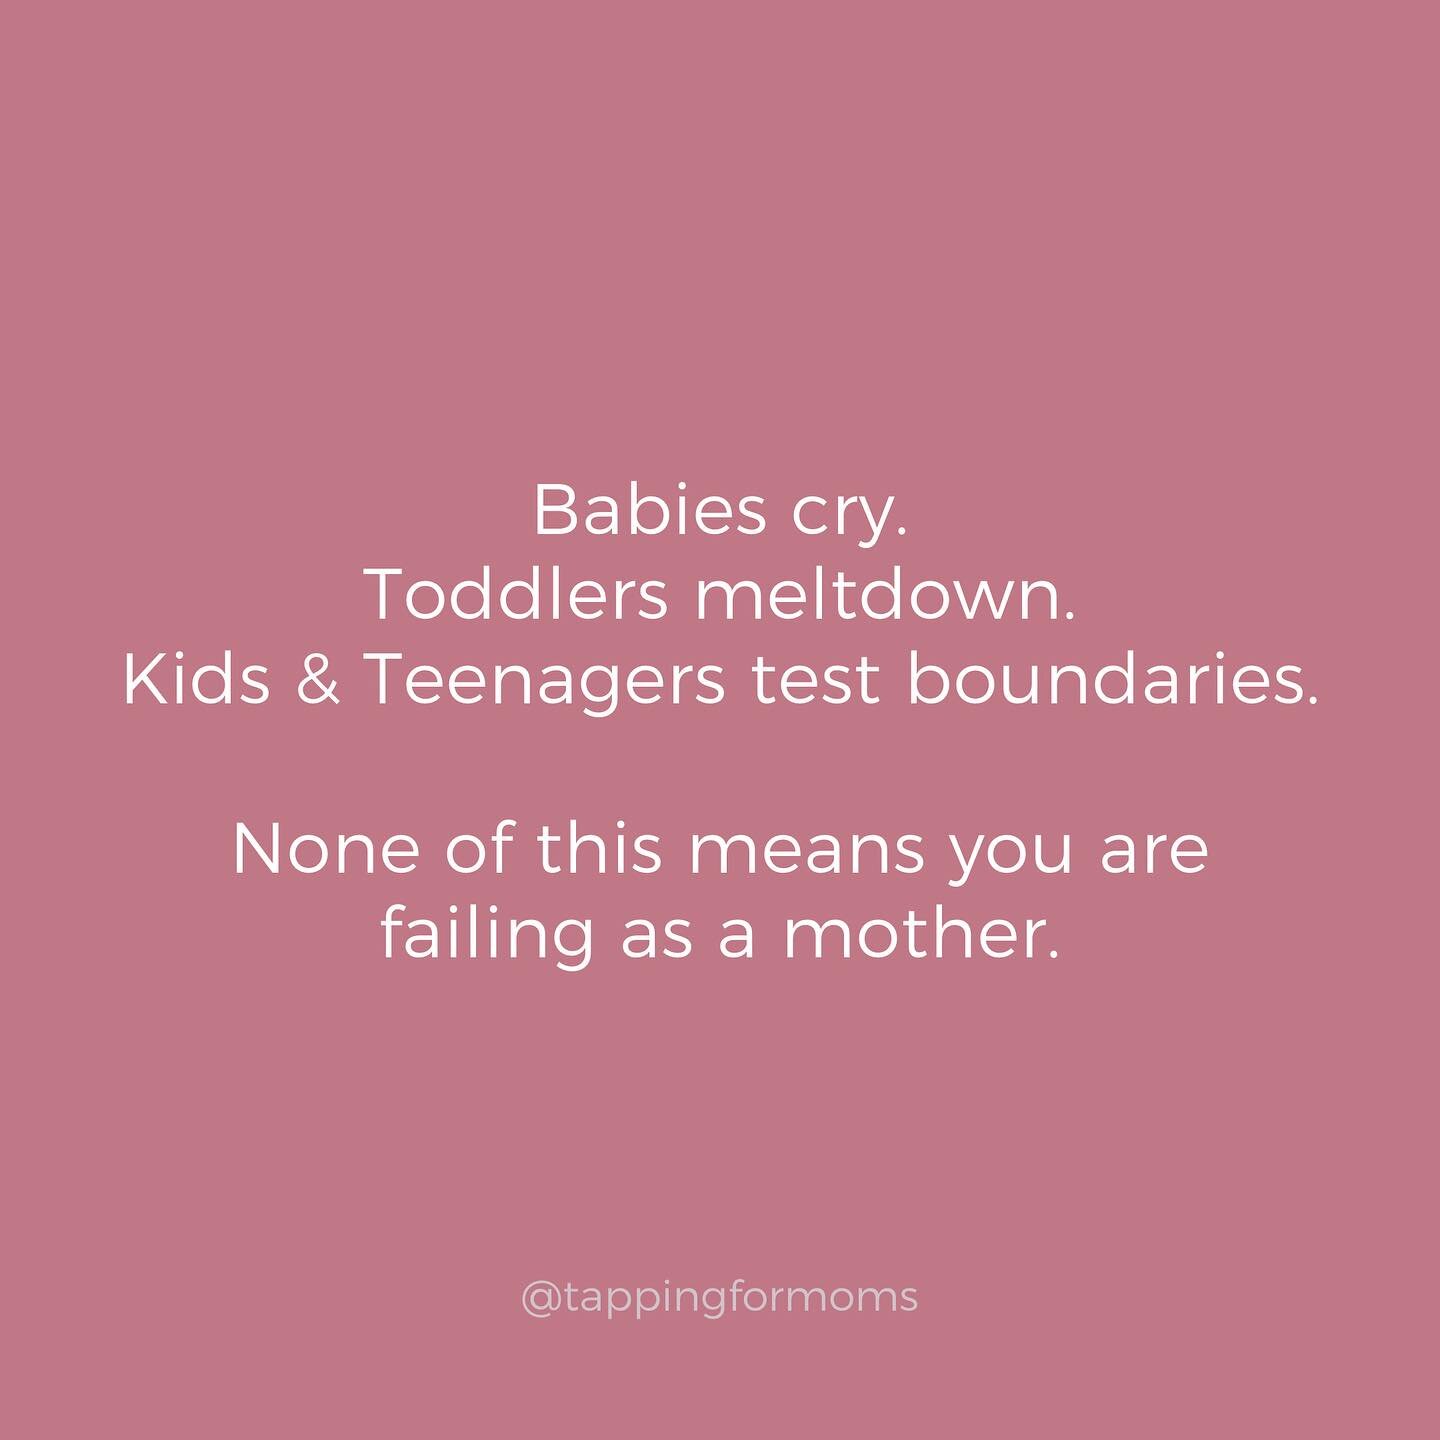 Remember this! You are not failing. This is hard.

#mother #motherhood #eft #efttapping #eftpractitioner #postpartum #pregnancy #neurodiversity #ppd #ppdawareness #anxiety #anxietyrelief #anxiousmoms #anxietysupport #depressionhelp #healing #healingj